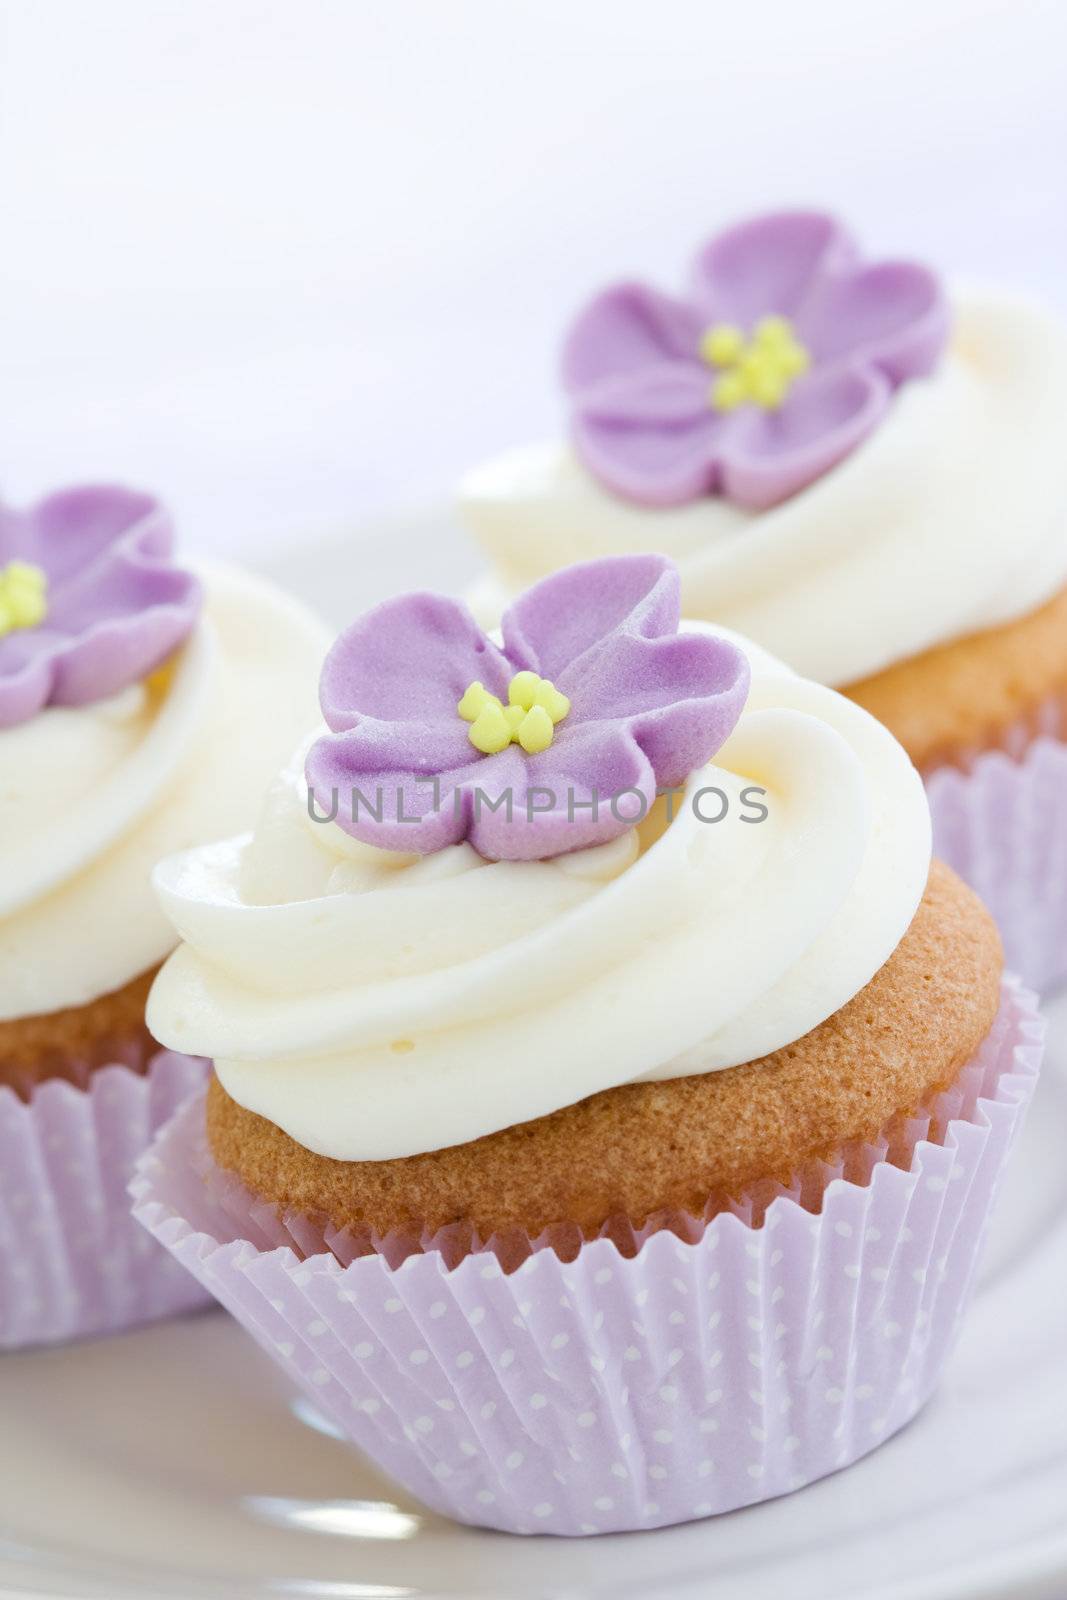 Mini cupcakes decorated with purple sugar flowers